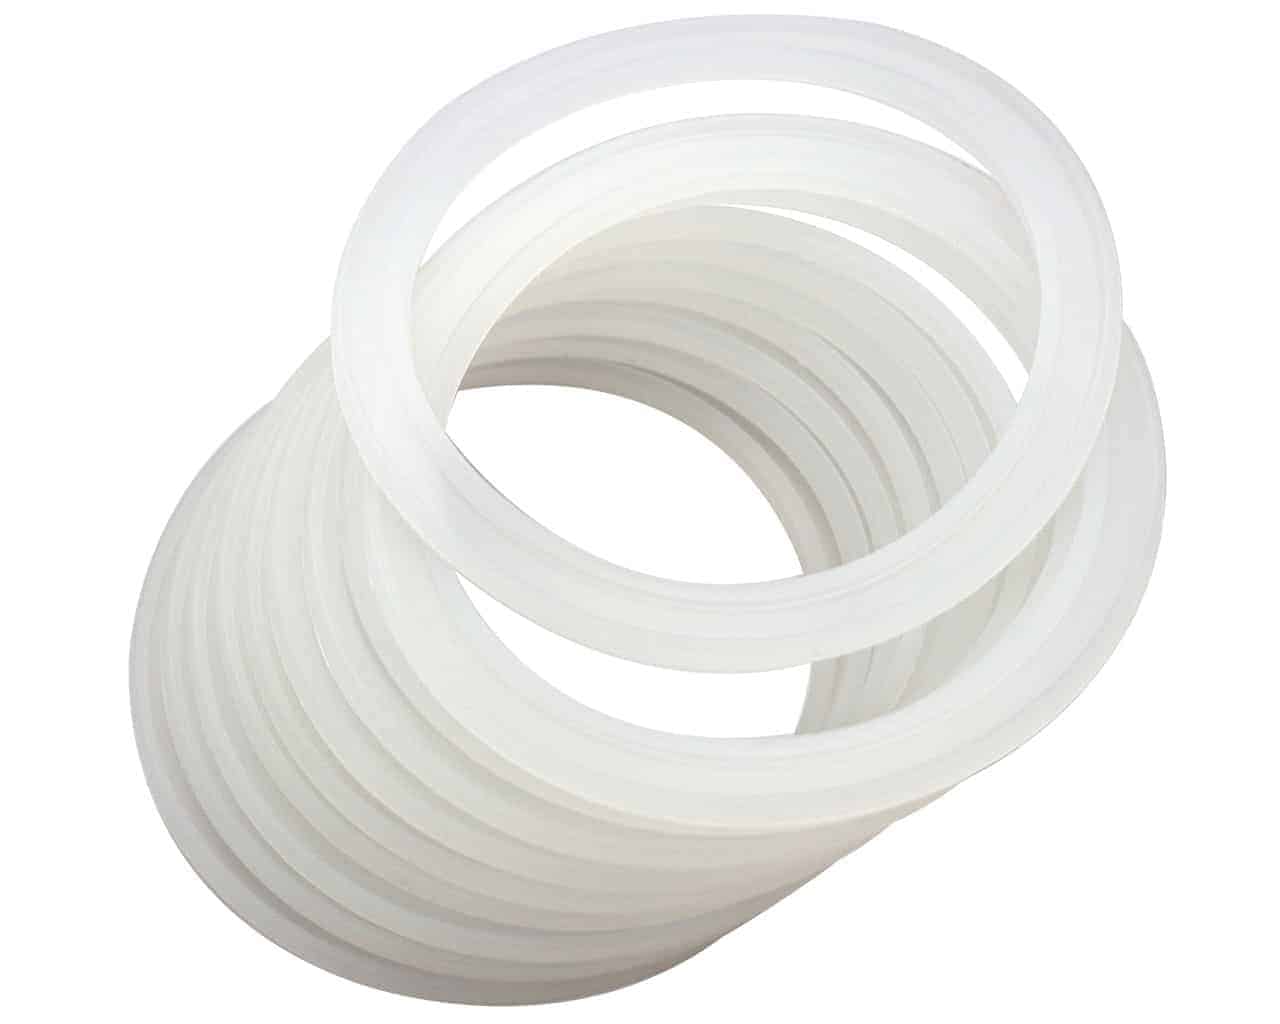 platinum-silicone-sealing-rings-seals-gaskets-wide-mouth-mason-jar-lids-10-pack-stacked